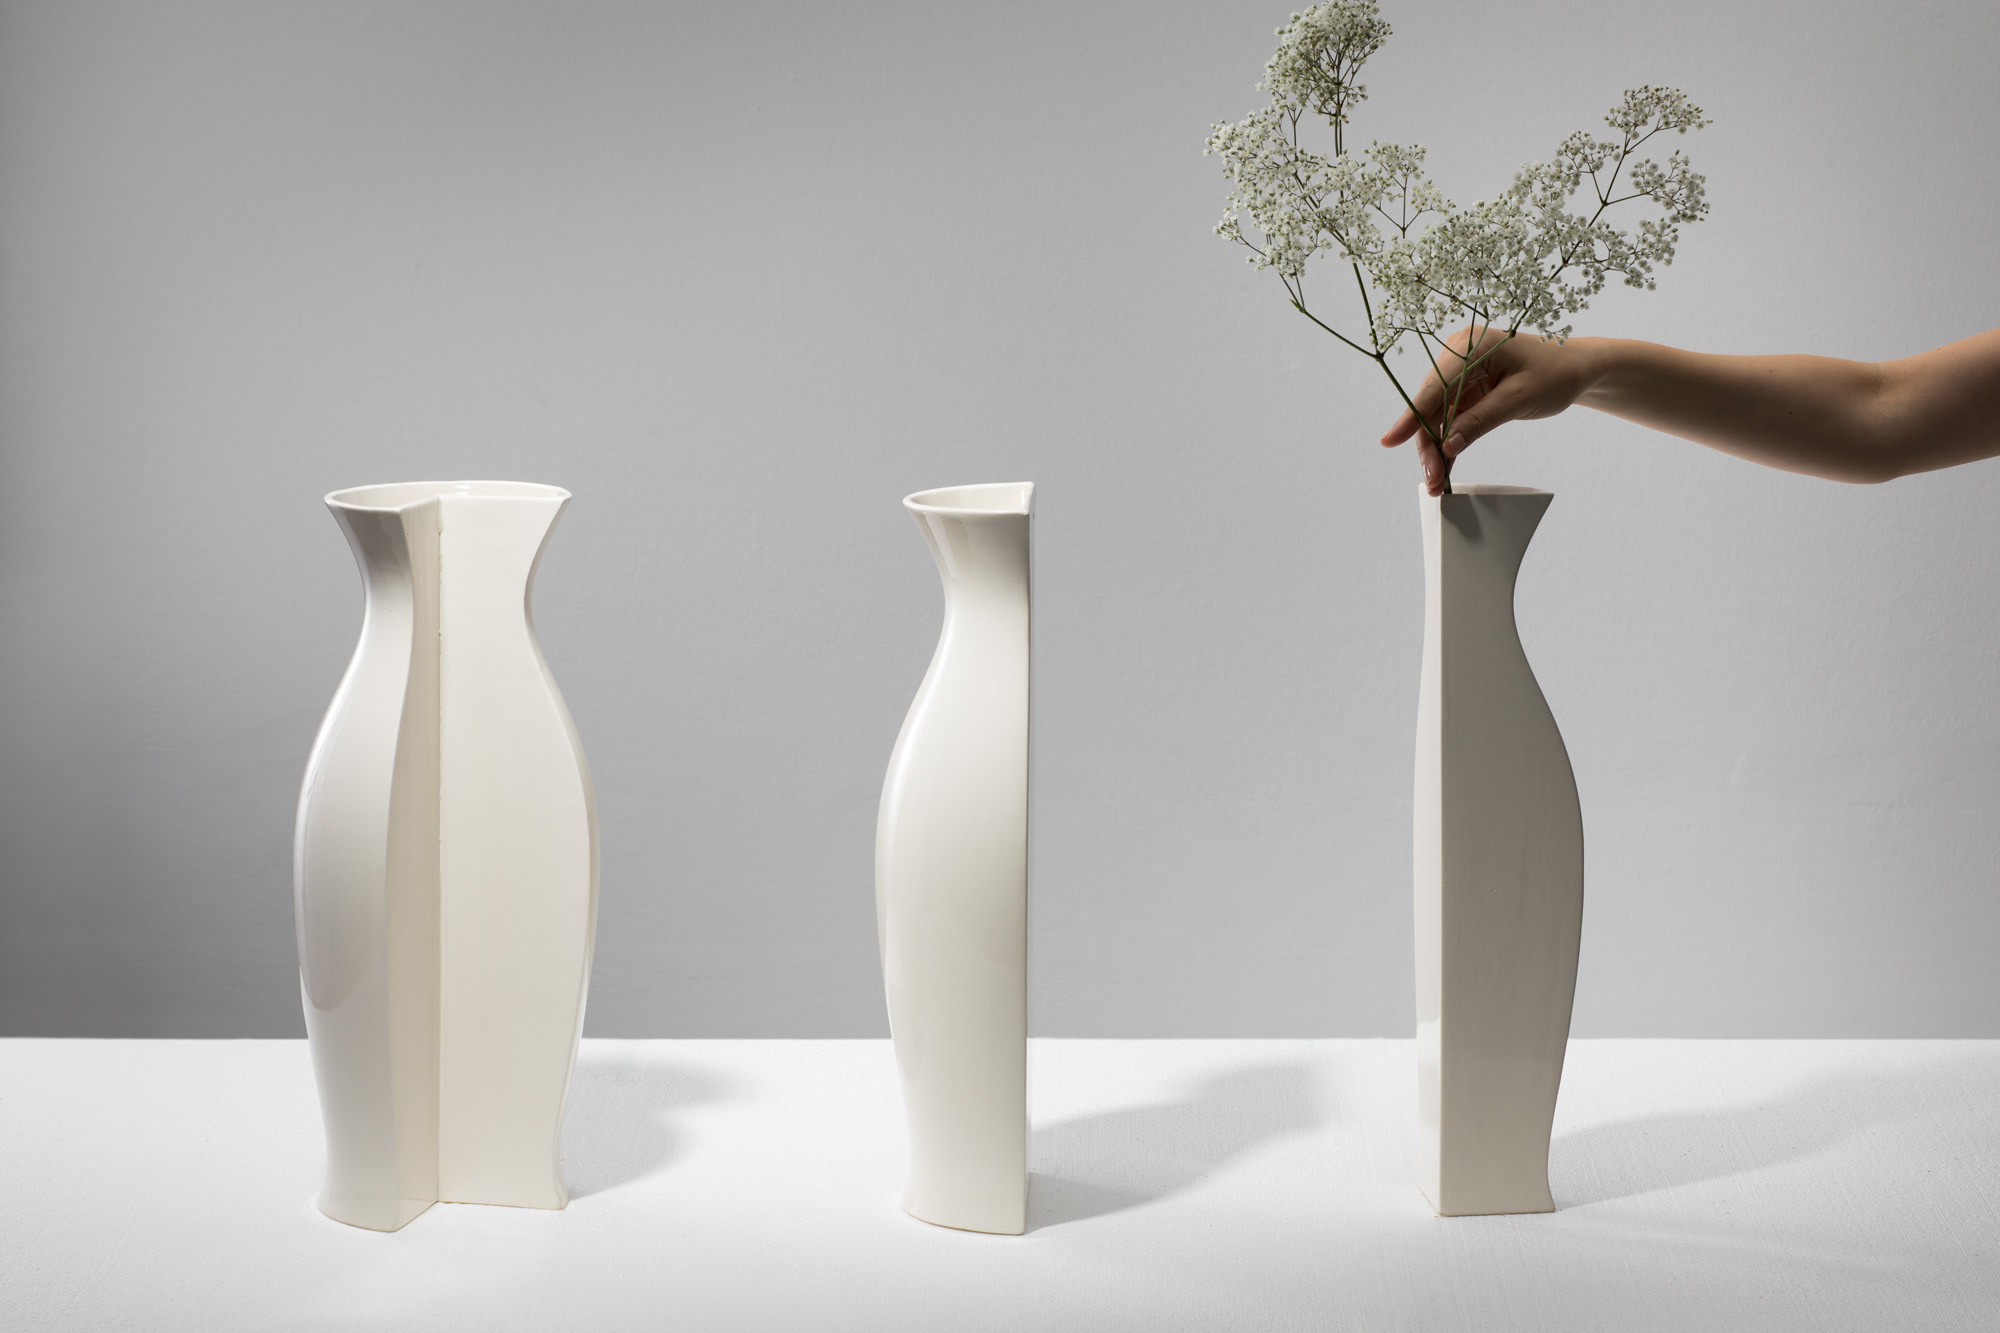 Vases for corners and walls by Klemens Schillinger.